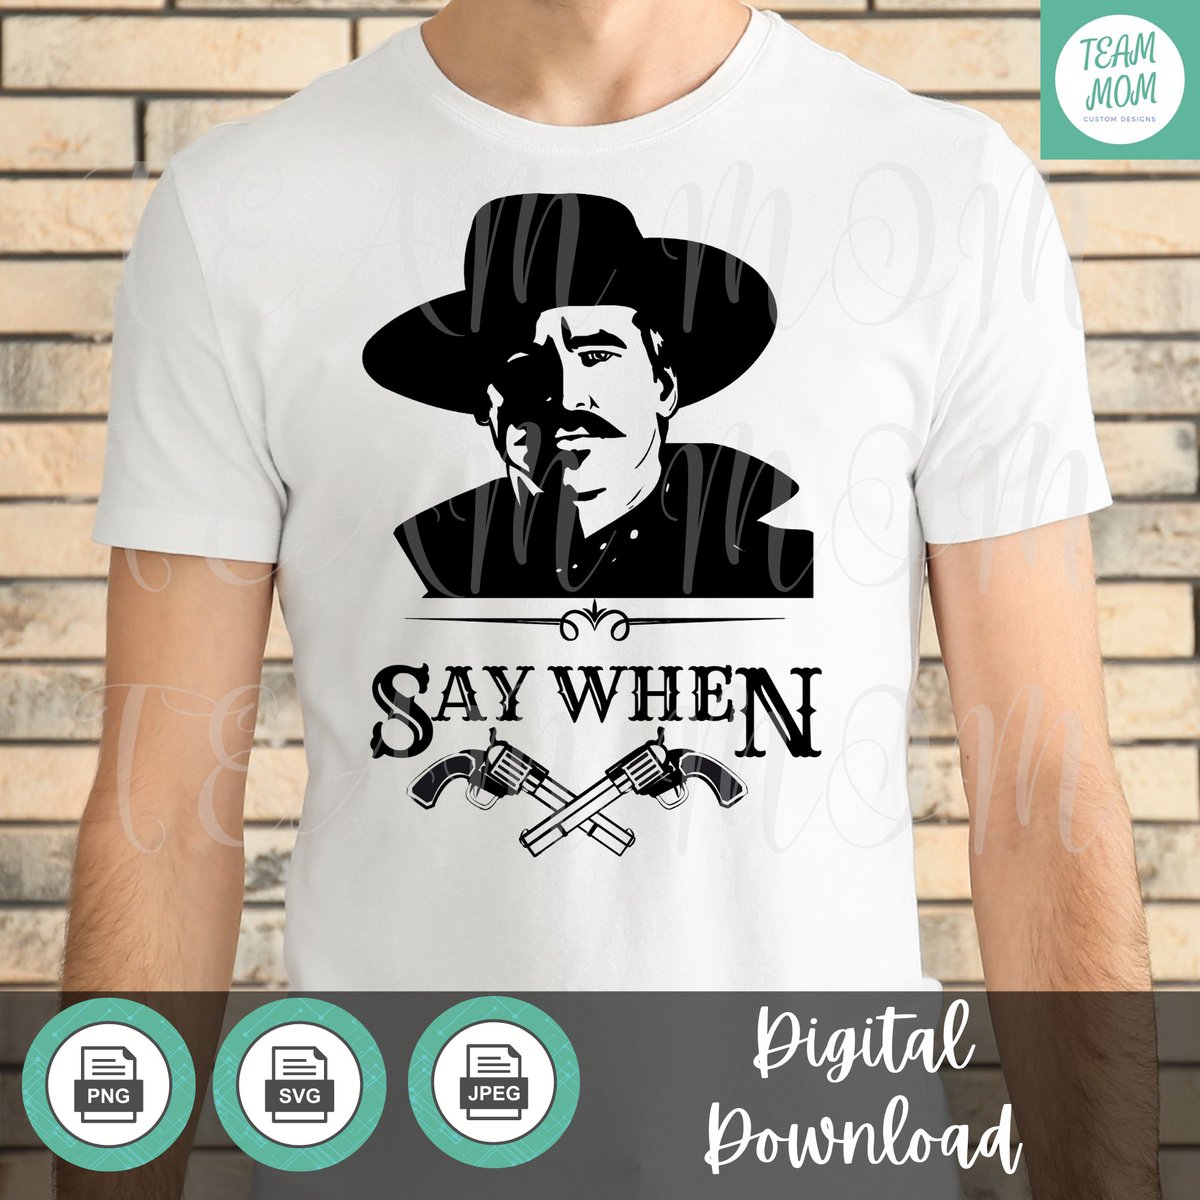 I can't get enough of #docholliday quotes! SVG's available!
etsy.com/shop/TeammomSt…
sellfy.com/team-mom-custo…
#imyourhuckleberry #saywhen #itsareckonin #itsaboy #wyattearp #okcorral #Western #tombstone #Mensfashion #menswear #diy #giftsforhim #budgetgifts